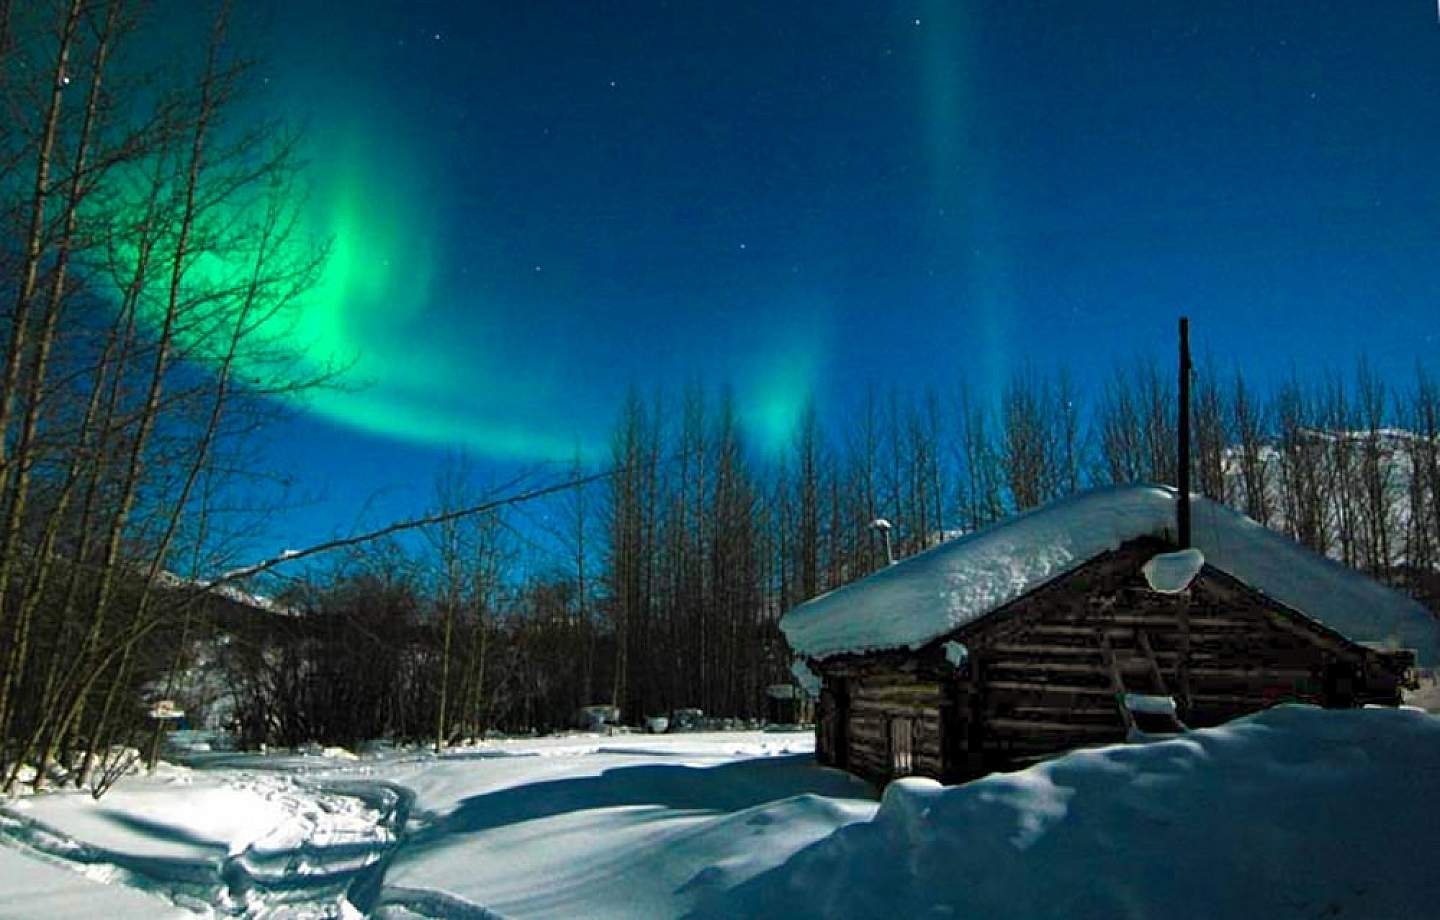 Check off seeing the spectacular Northern Lights from your bucket list